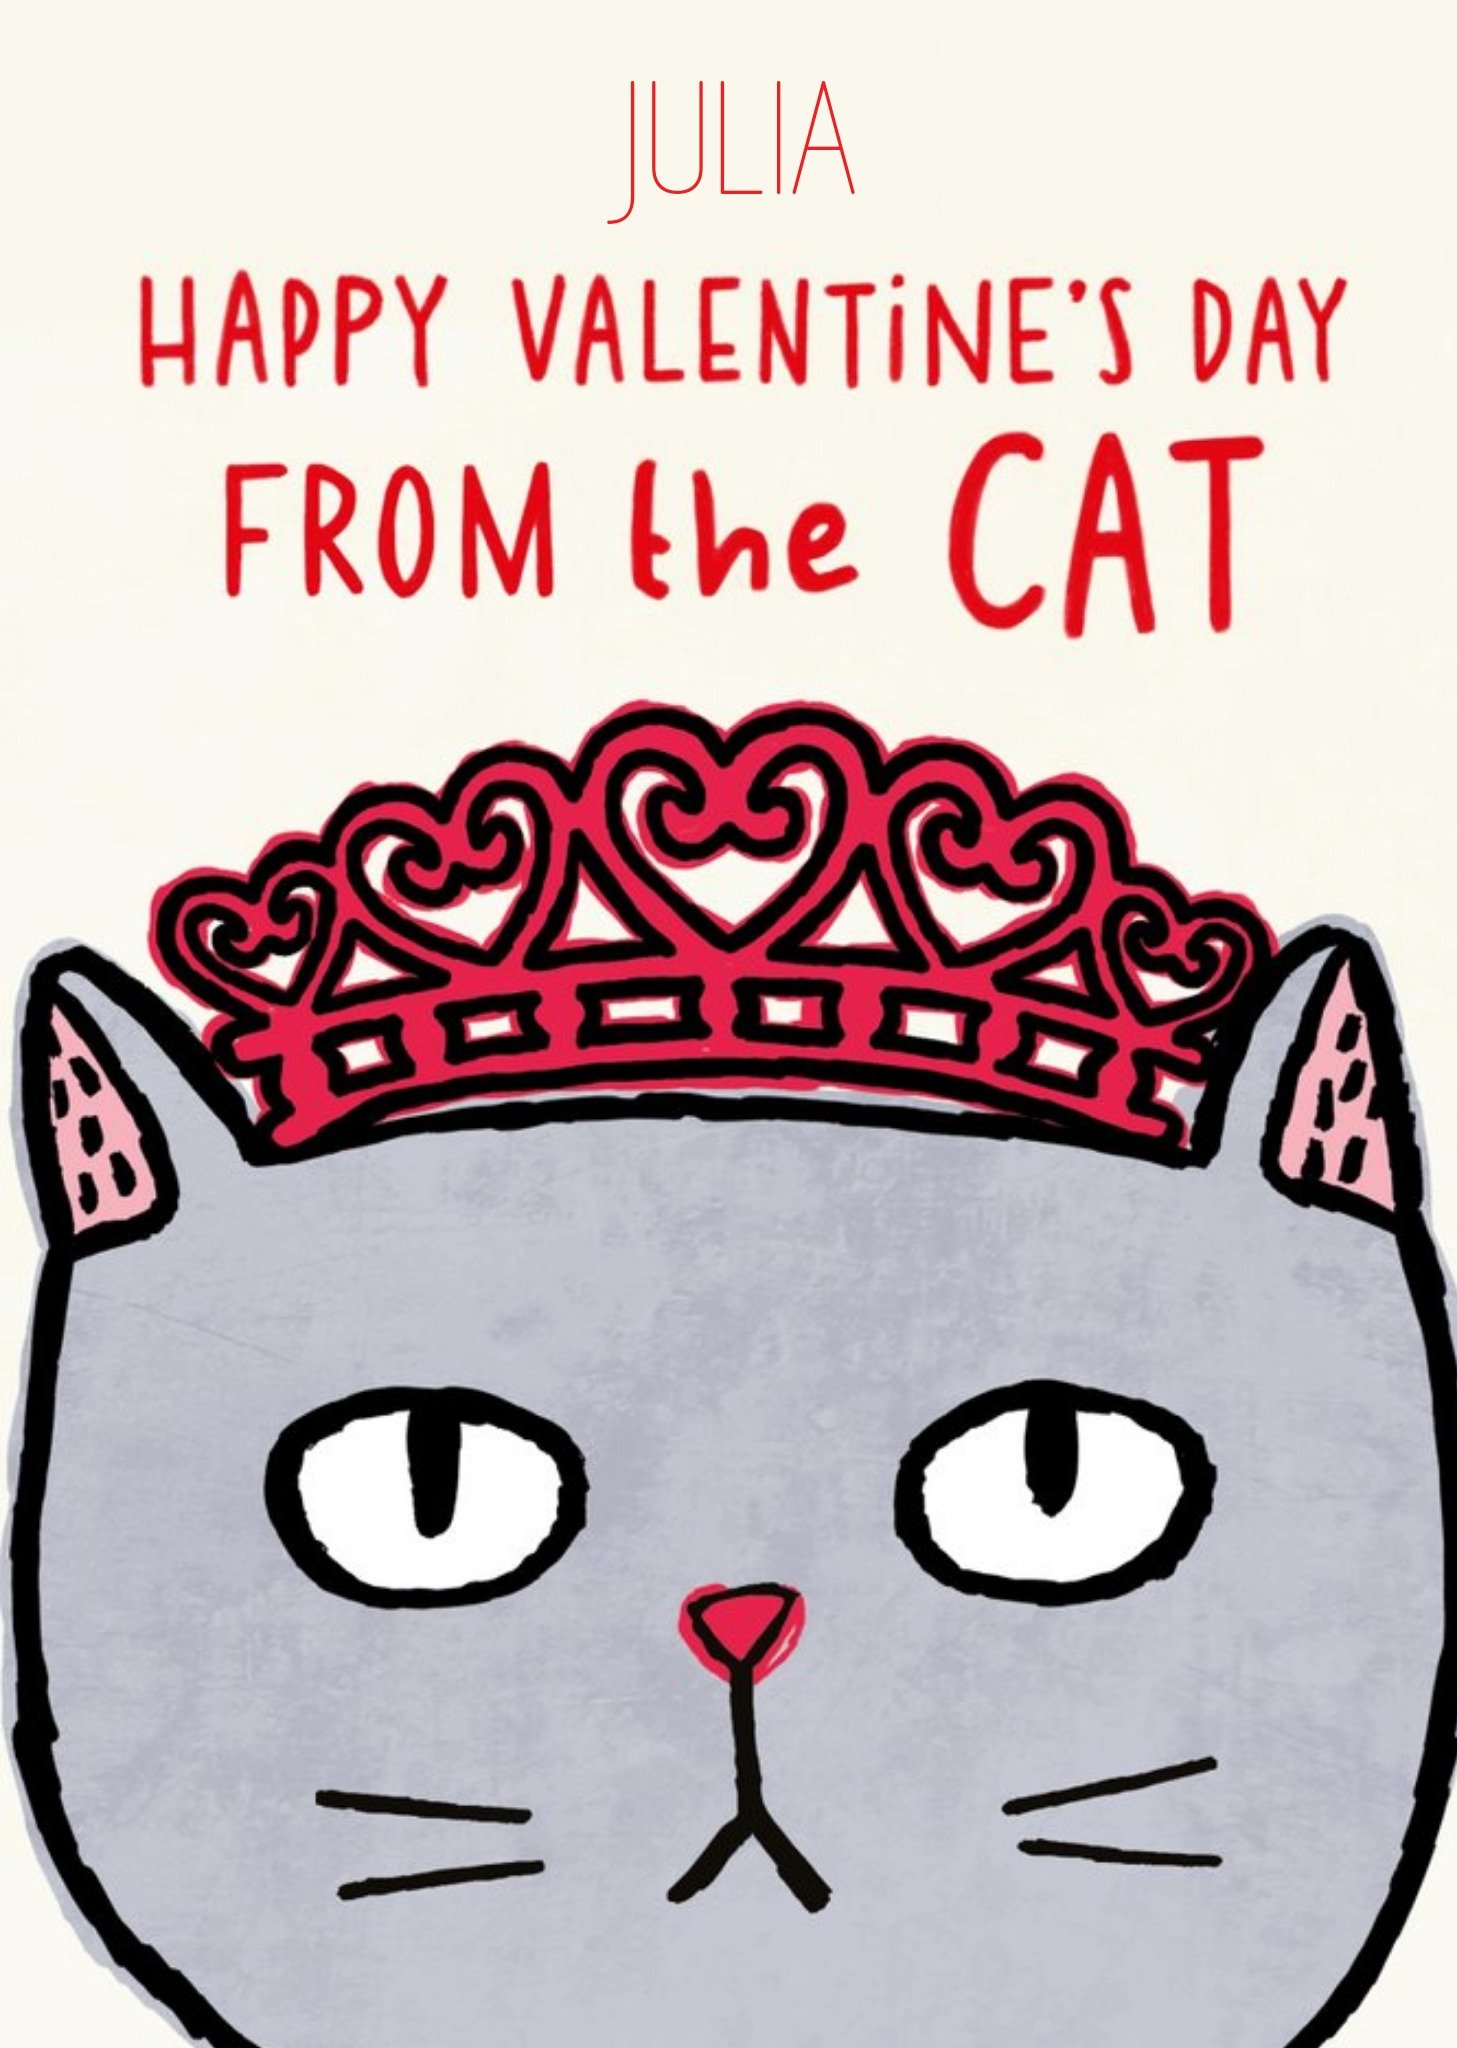 Moonpig Illustration Of A Cat Wearing A Tiara From The Cat Valentine's Day Card Ecard